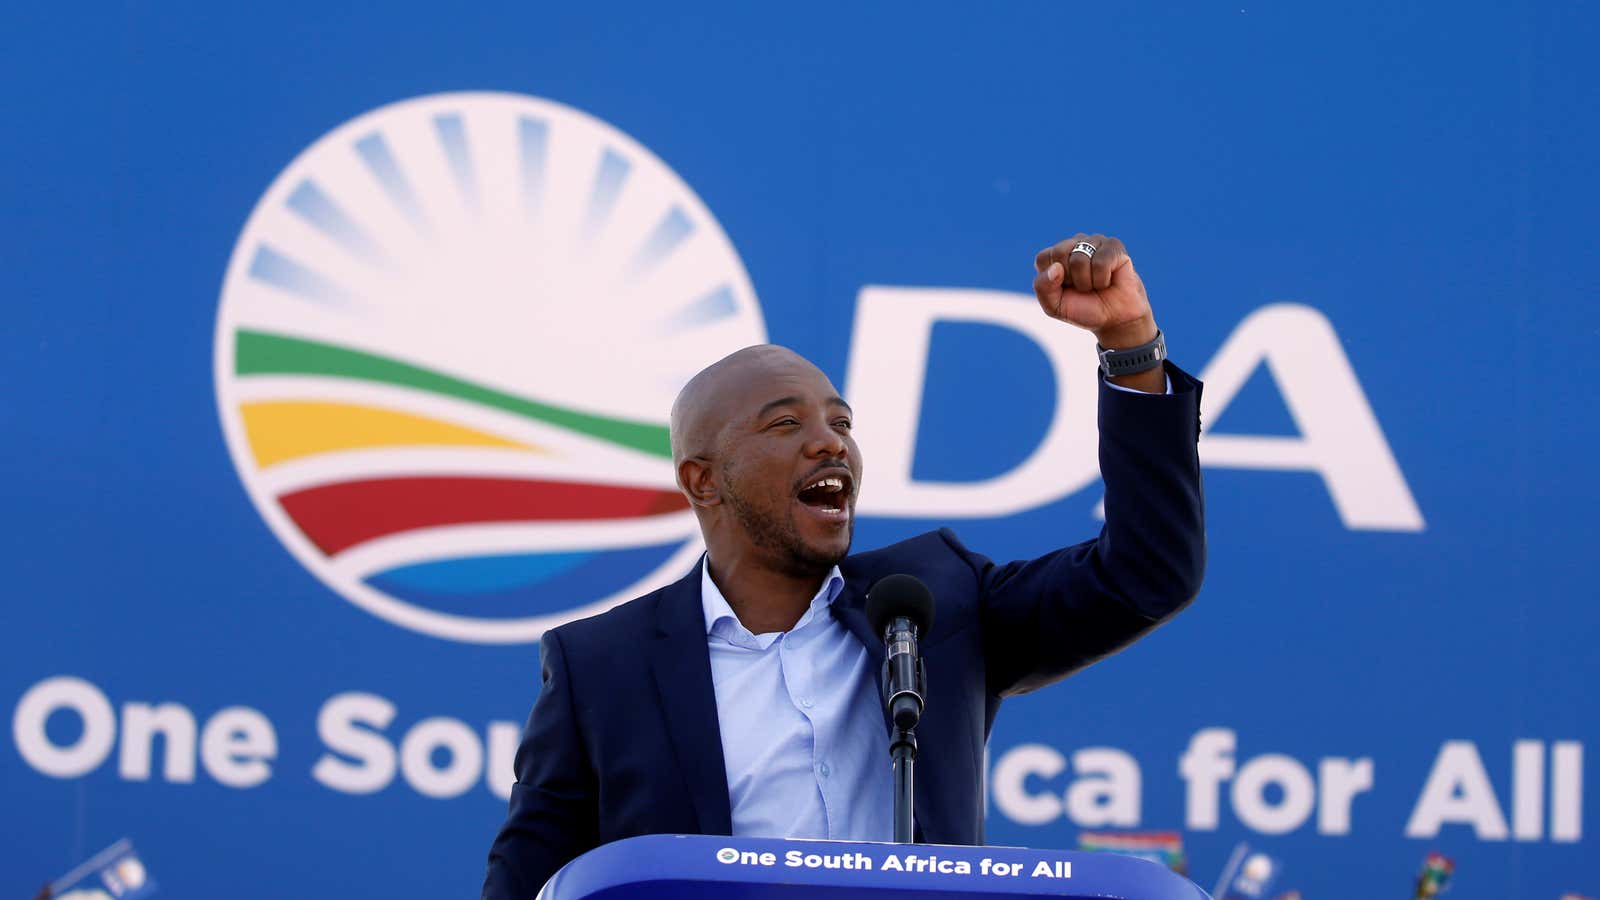 Mmusi Maimane, leader of South Africa’s largest opposition party, the Democratic Alliance (DA), addresses supporters at his party’s final election rally ahead of the country’s May 8